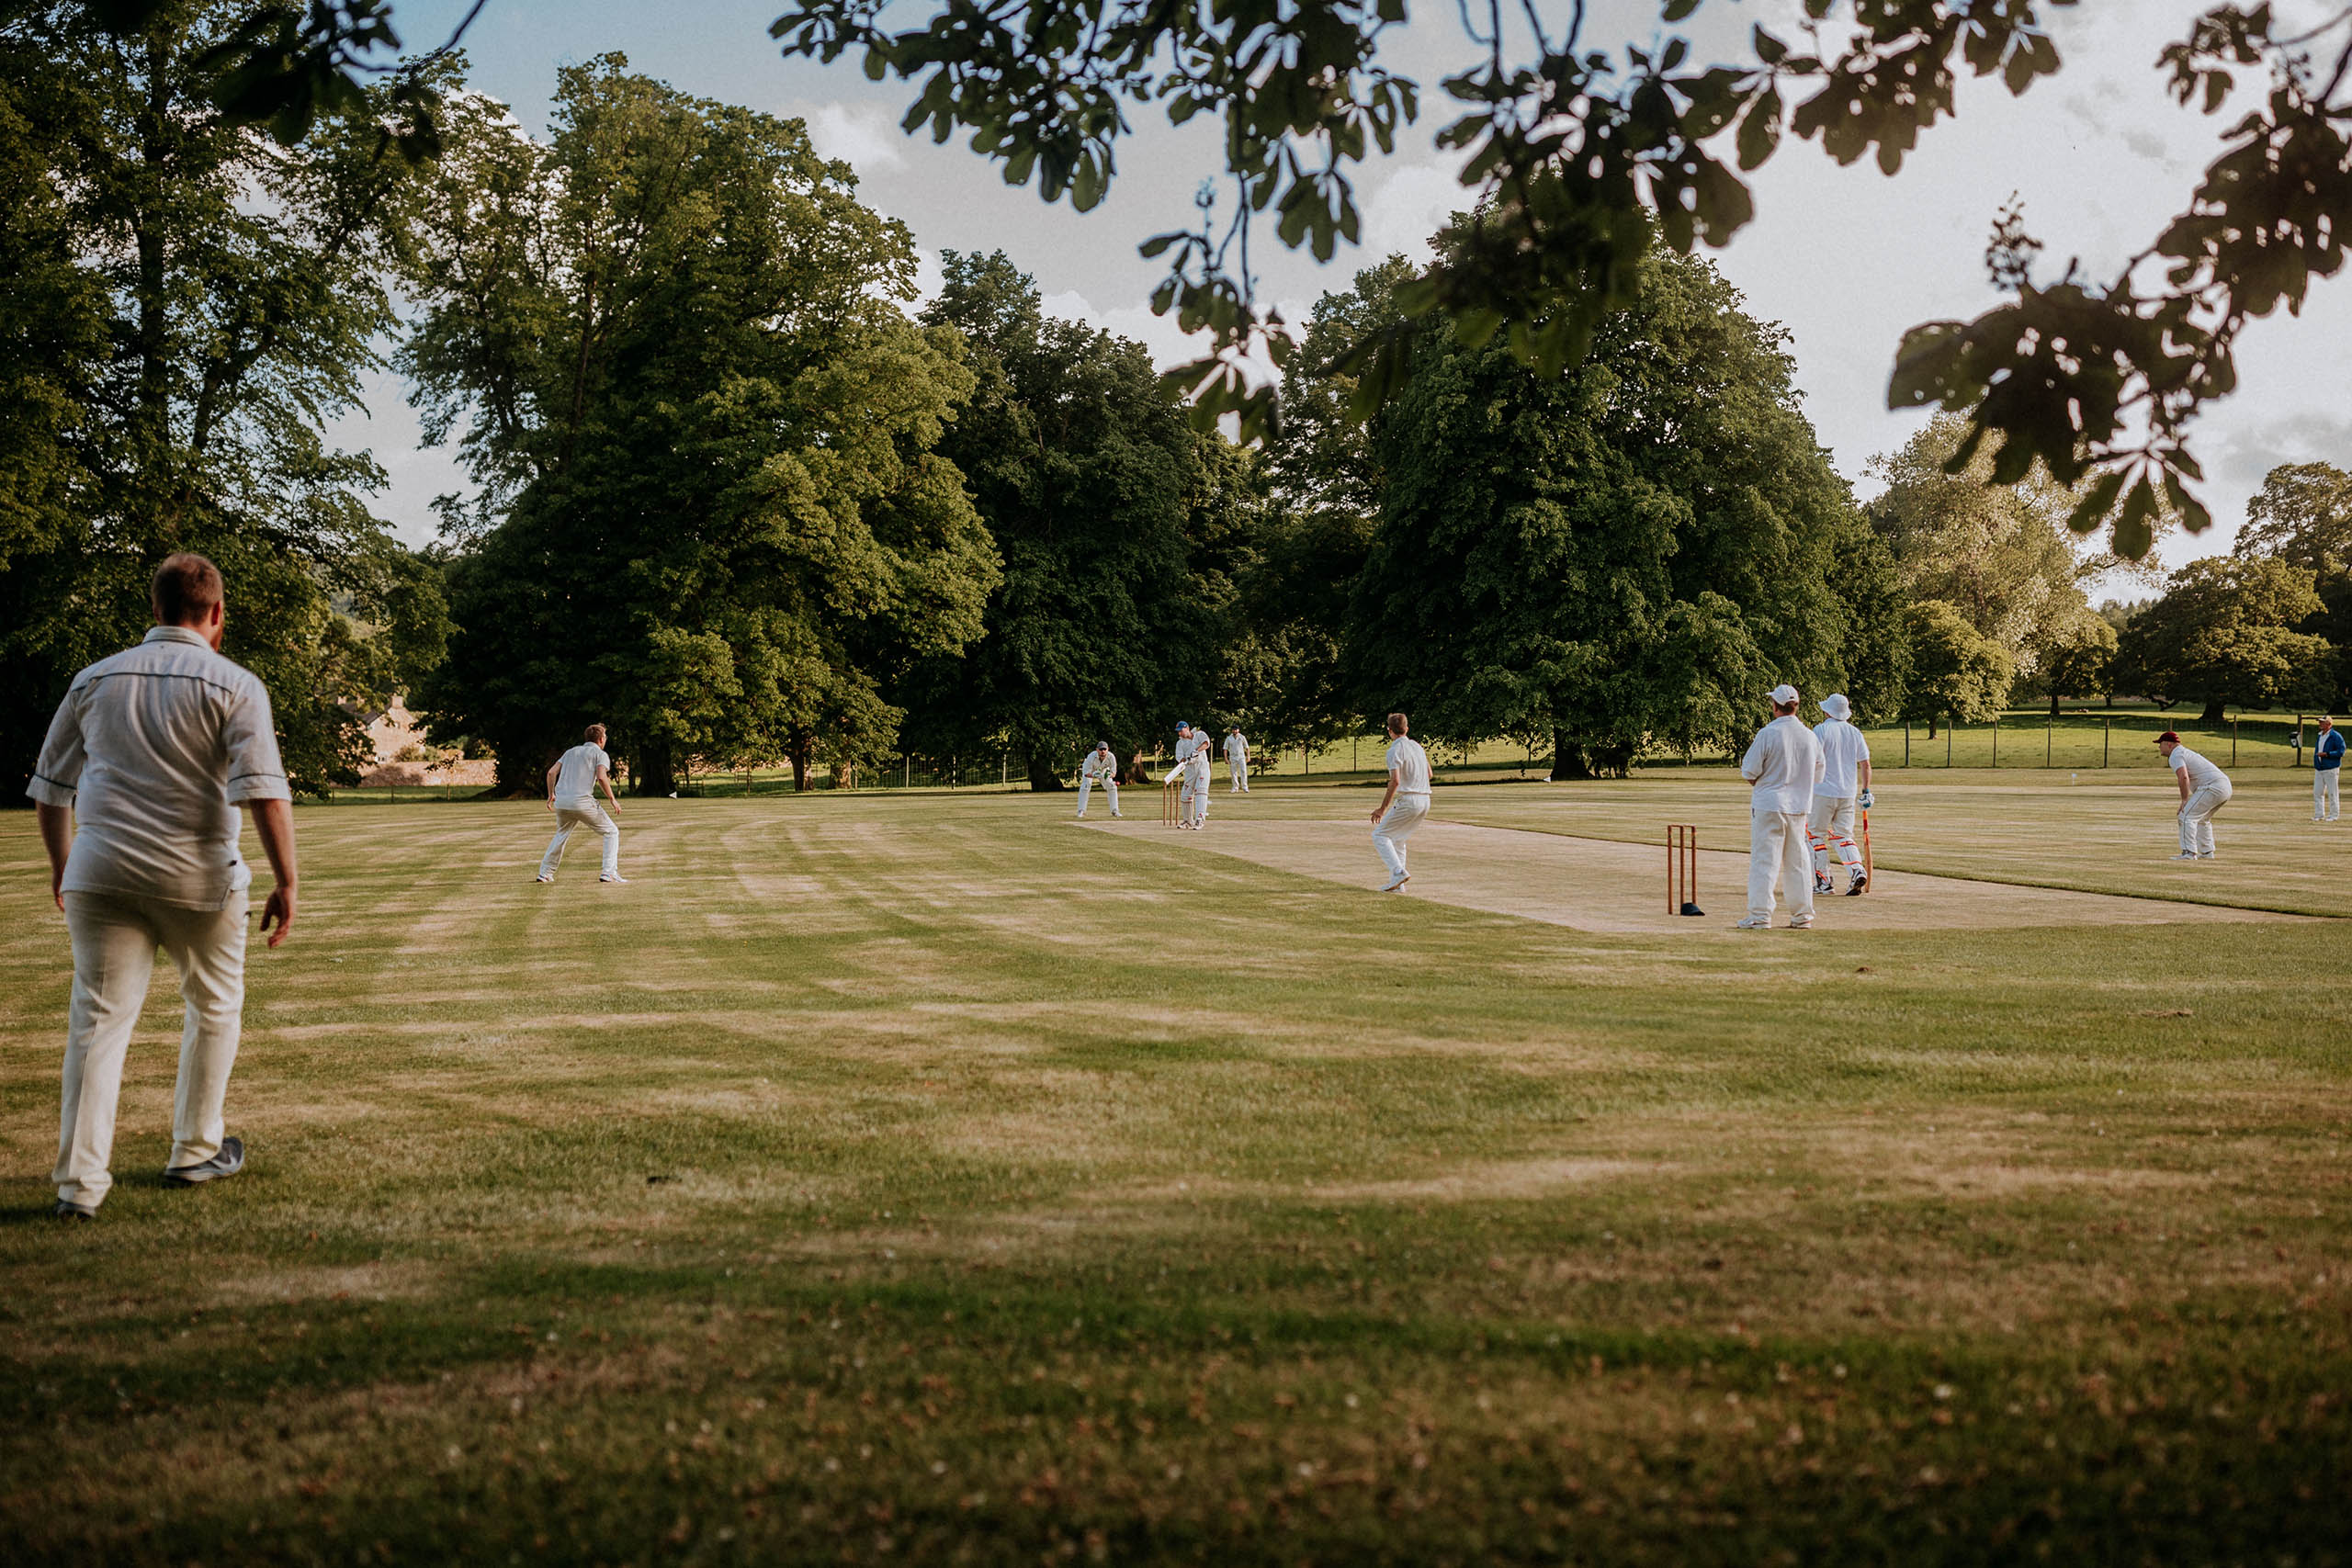 A game of cricket at Swinton Estate in North Yorkshire